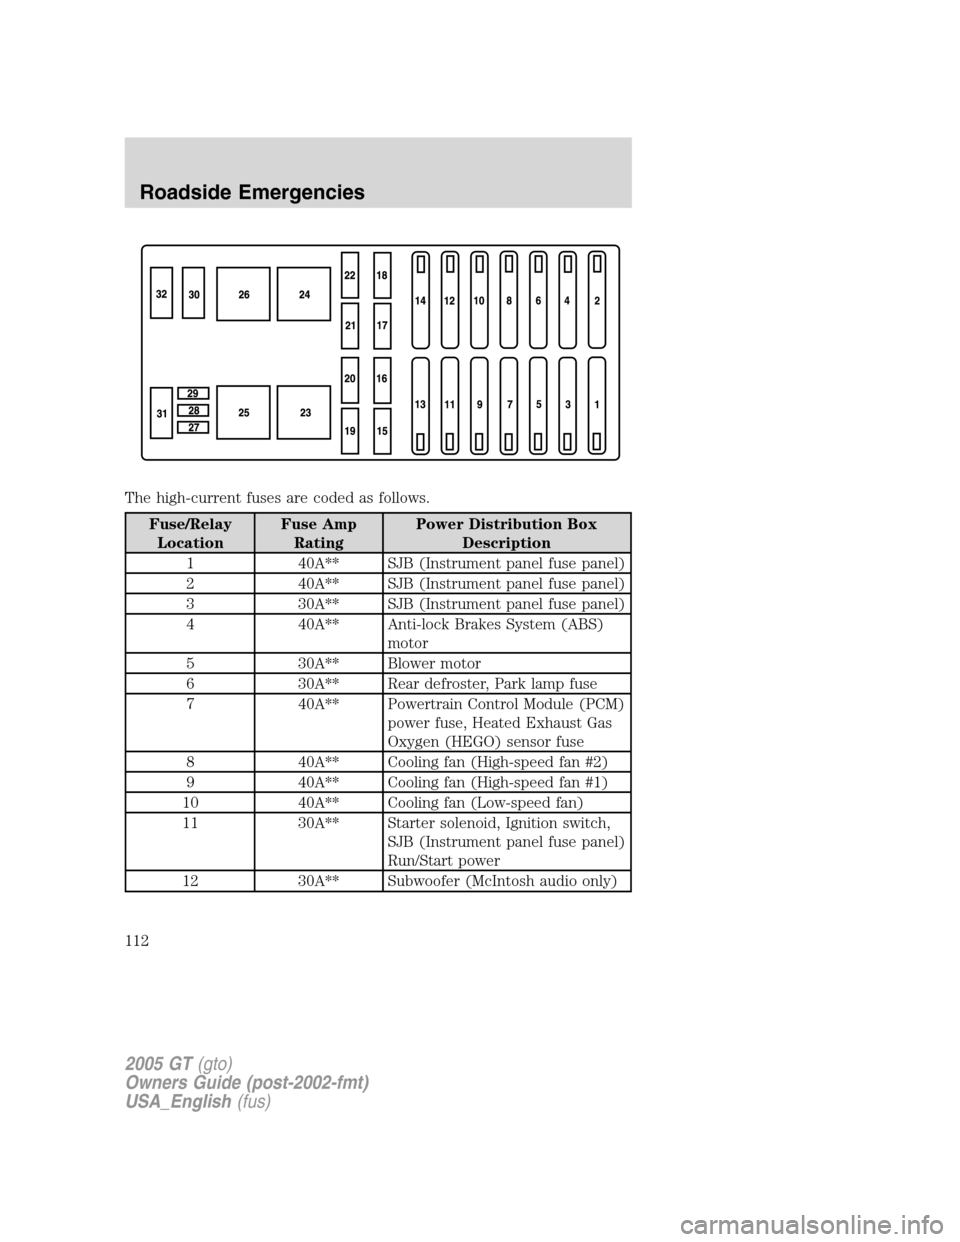 FORD GT 2005 1.G Owners Manual 
The high-current fuses are coded as follows.
Fuse/RelayLocation Fuse Amp
Rating Power Distribution Box
Description
1 40A** SJB (Instrument panel fuse panel)
2 40A** SJB (Instrument panel fuse panel)
